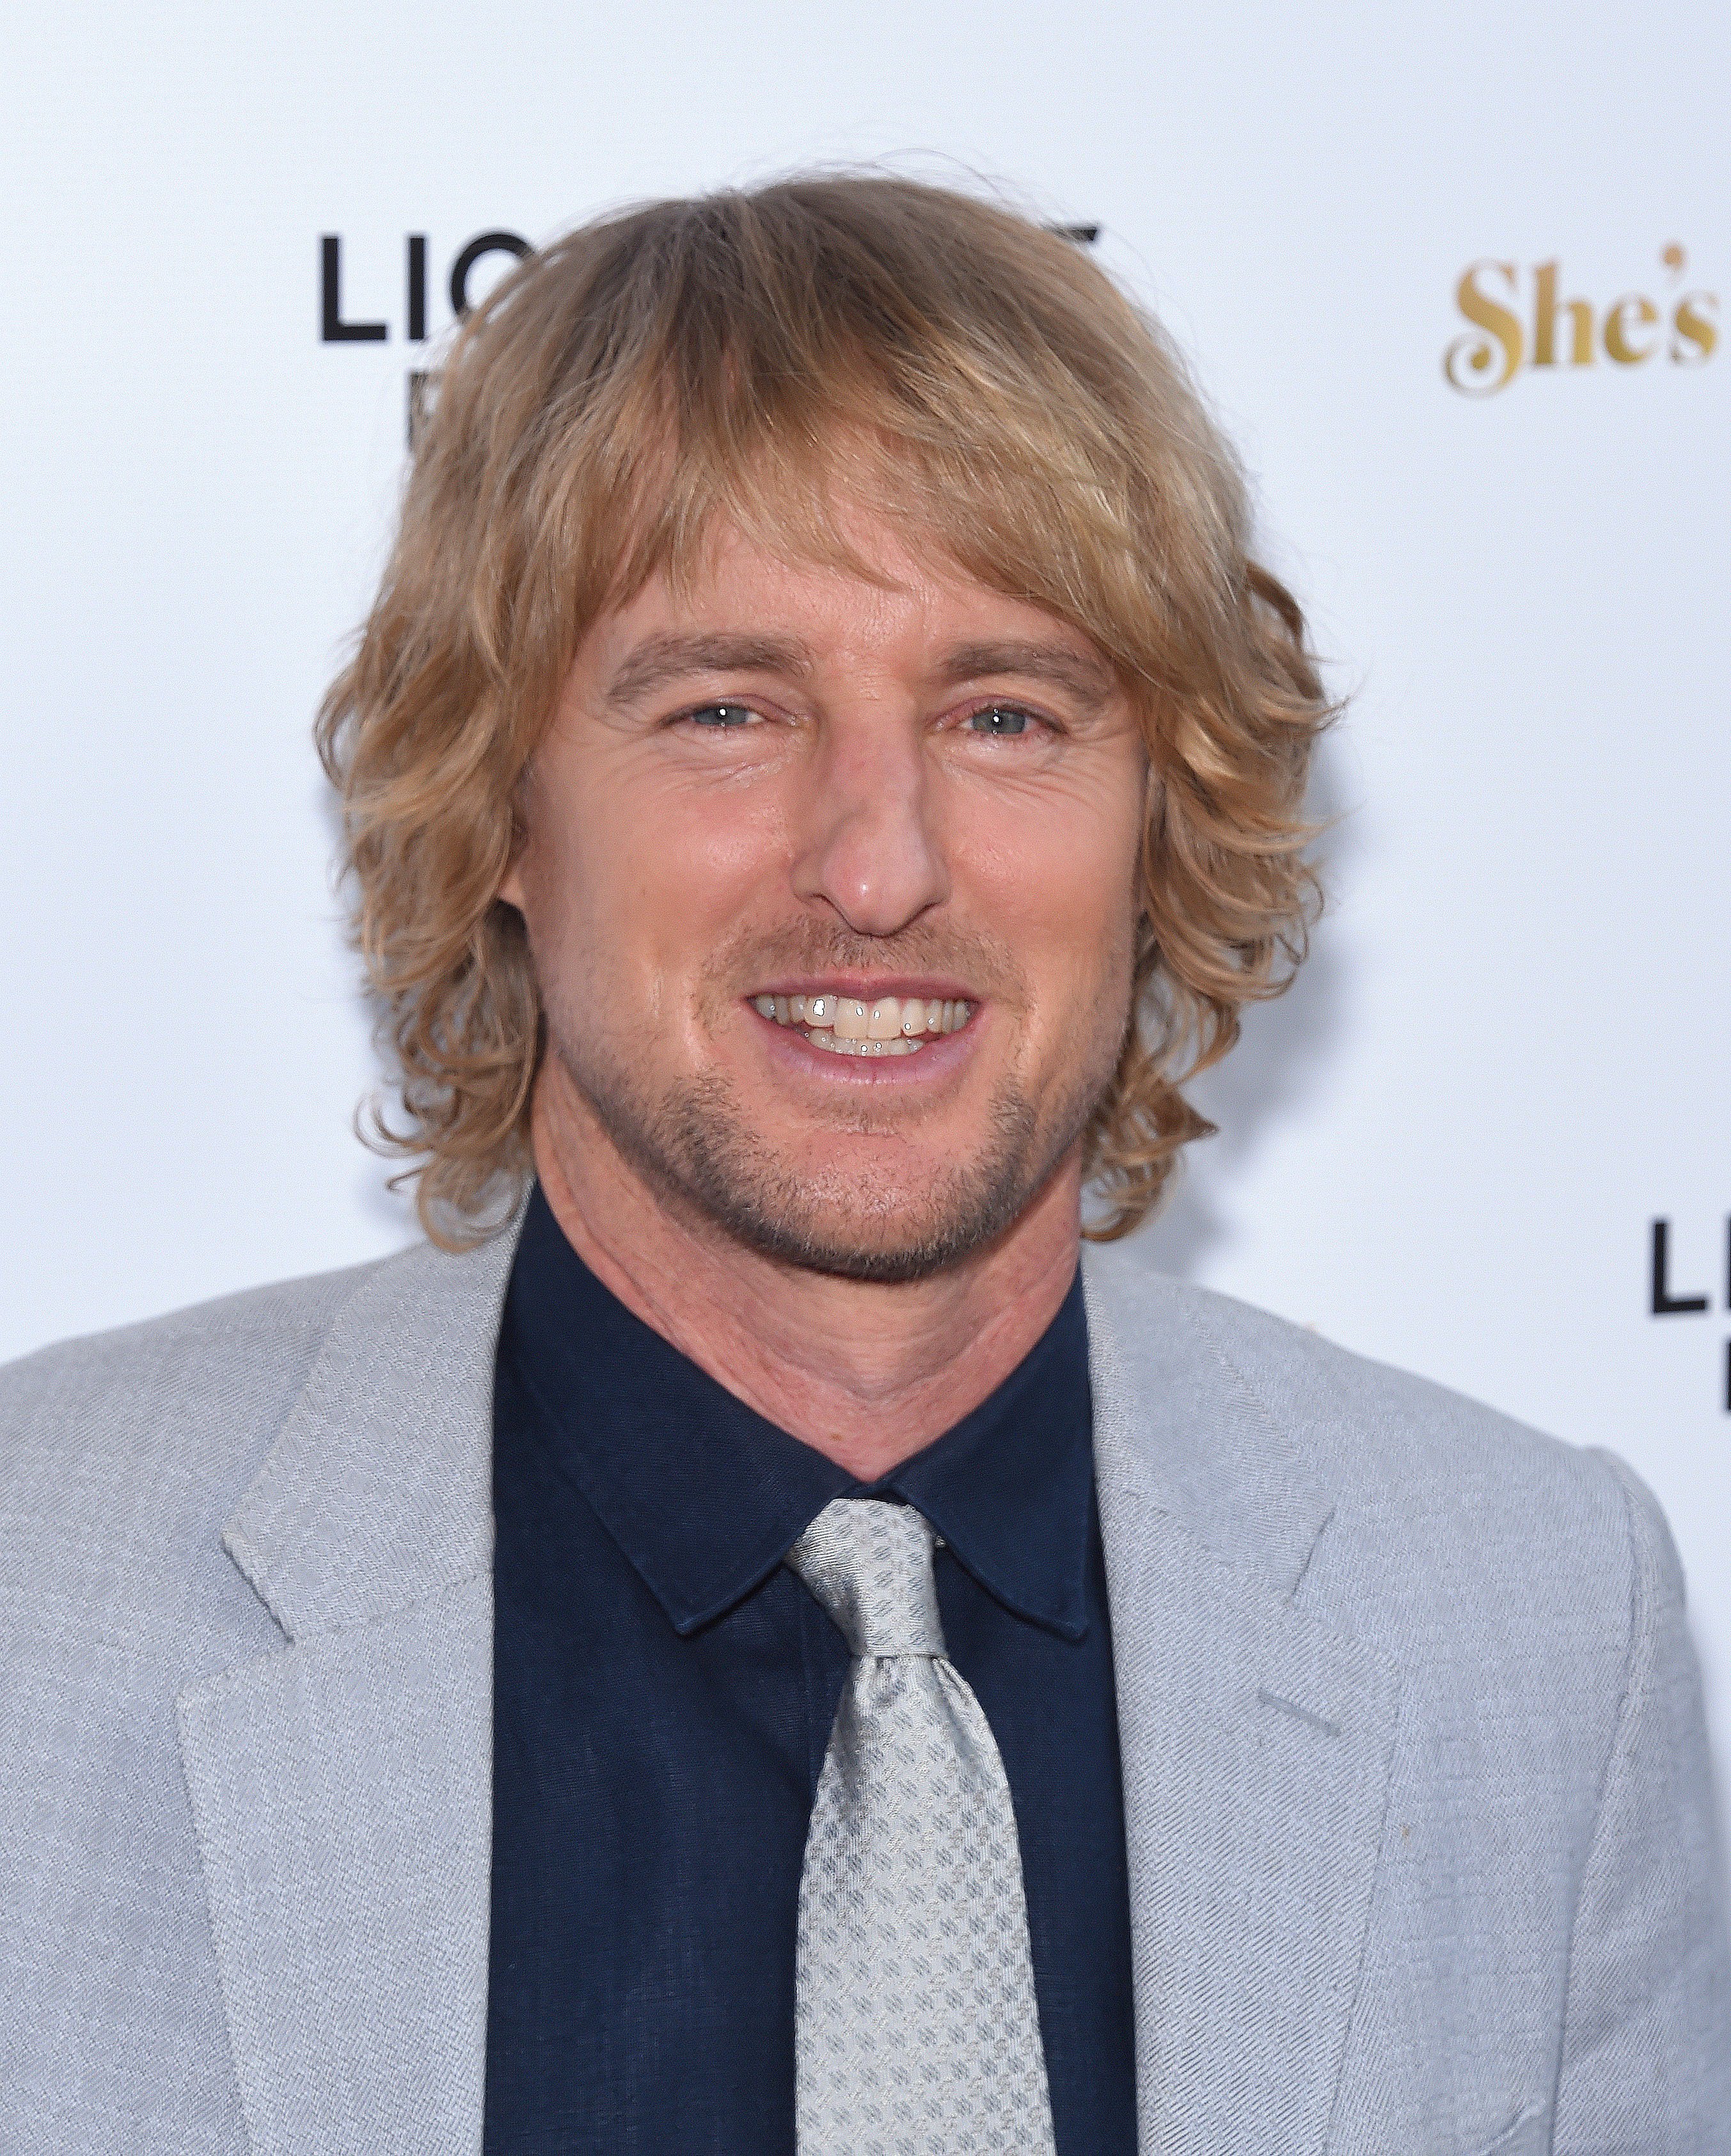 Owen Wilson envisioned at the Premiere for "She's funny that way" at Harmony Gold on August 19, 2015 |  Photo: Getty Images